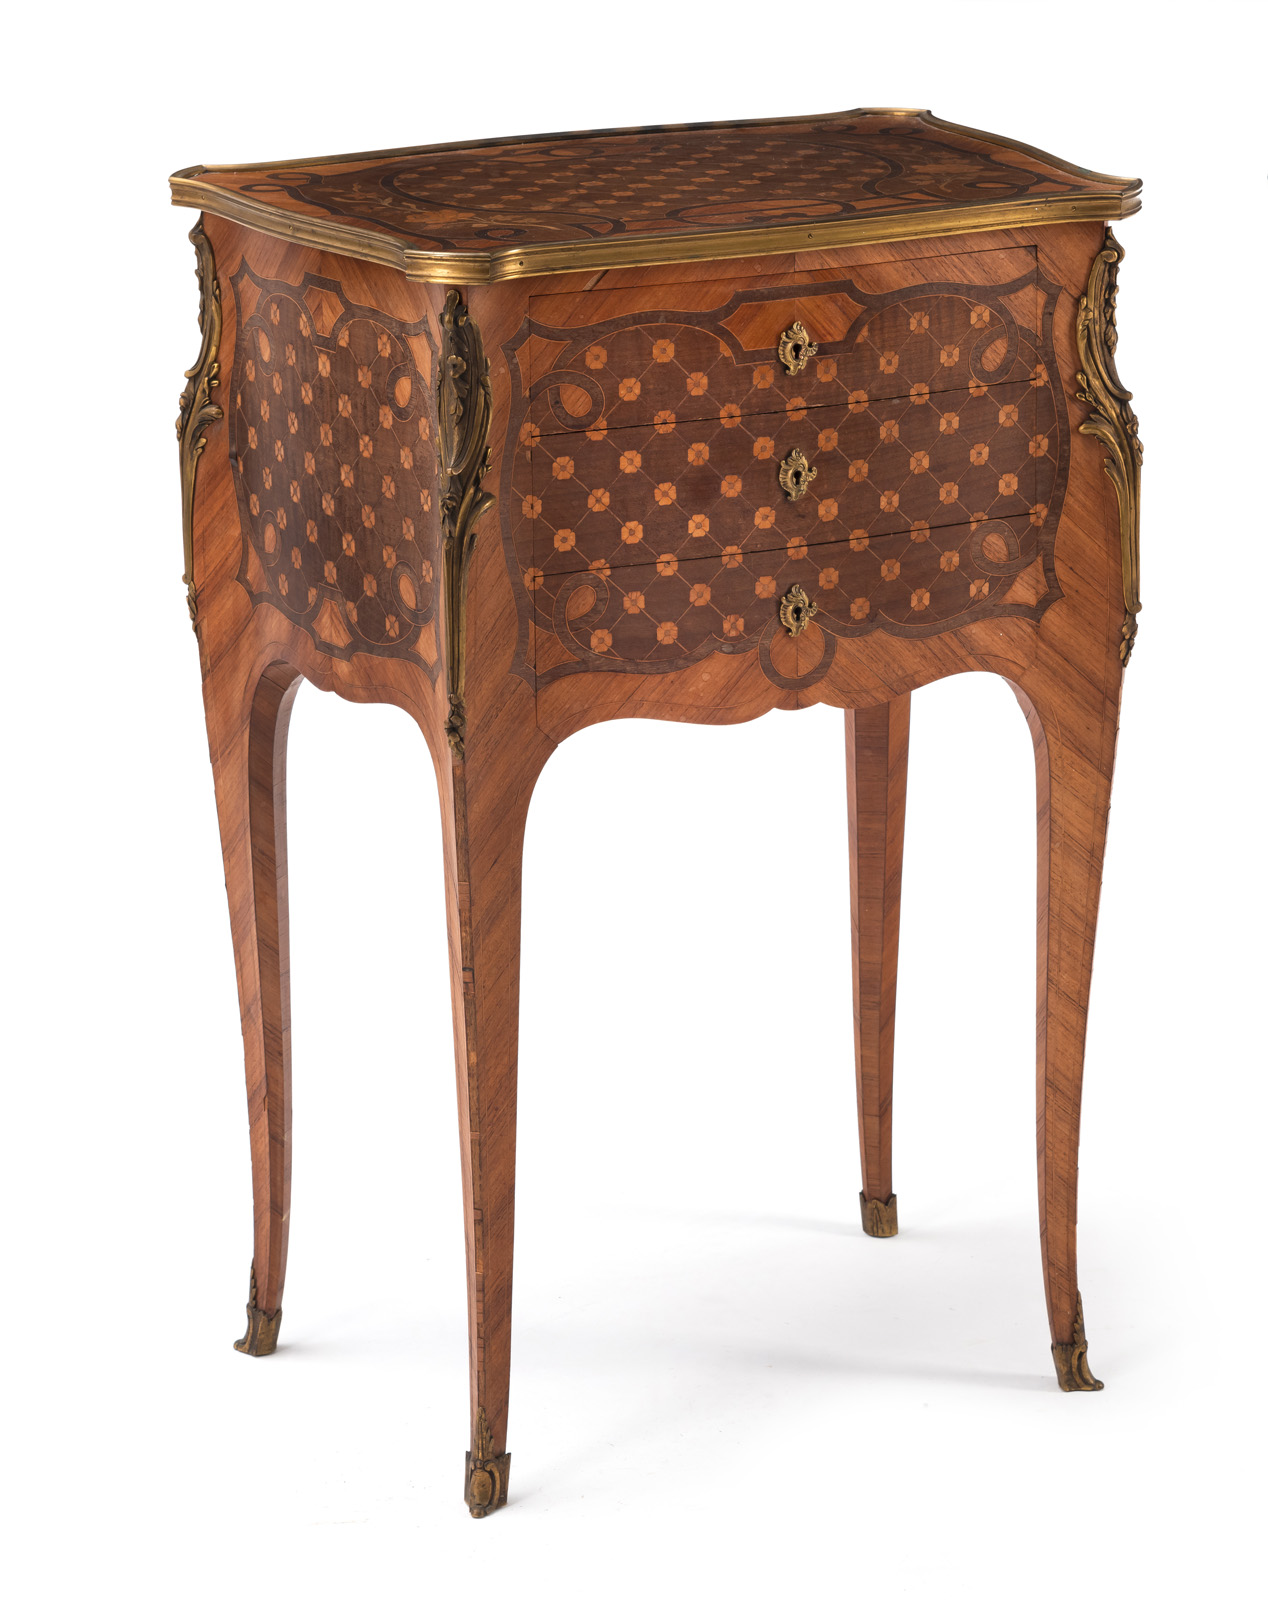 A LOUIS VI STYLE BRONZE MOUNTED PARTIAL EBONIZED KINGWOOD MARQUETRIED OCCASIONAL COMMODE